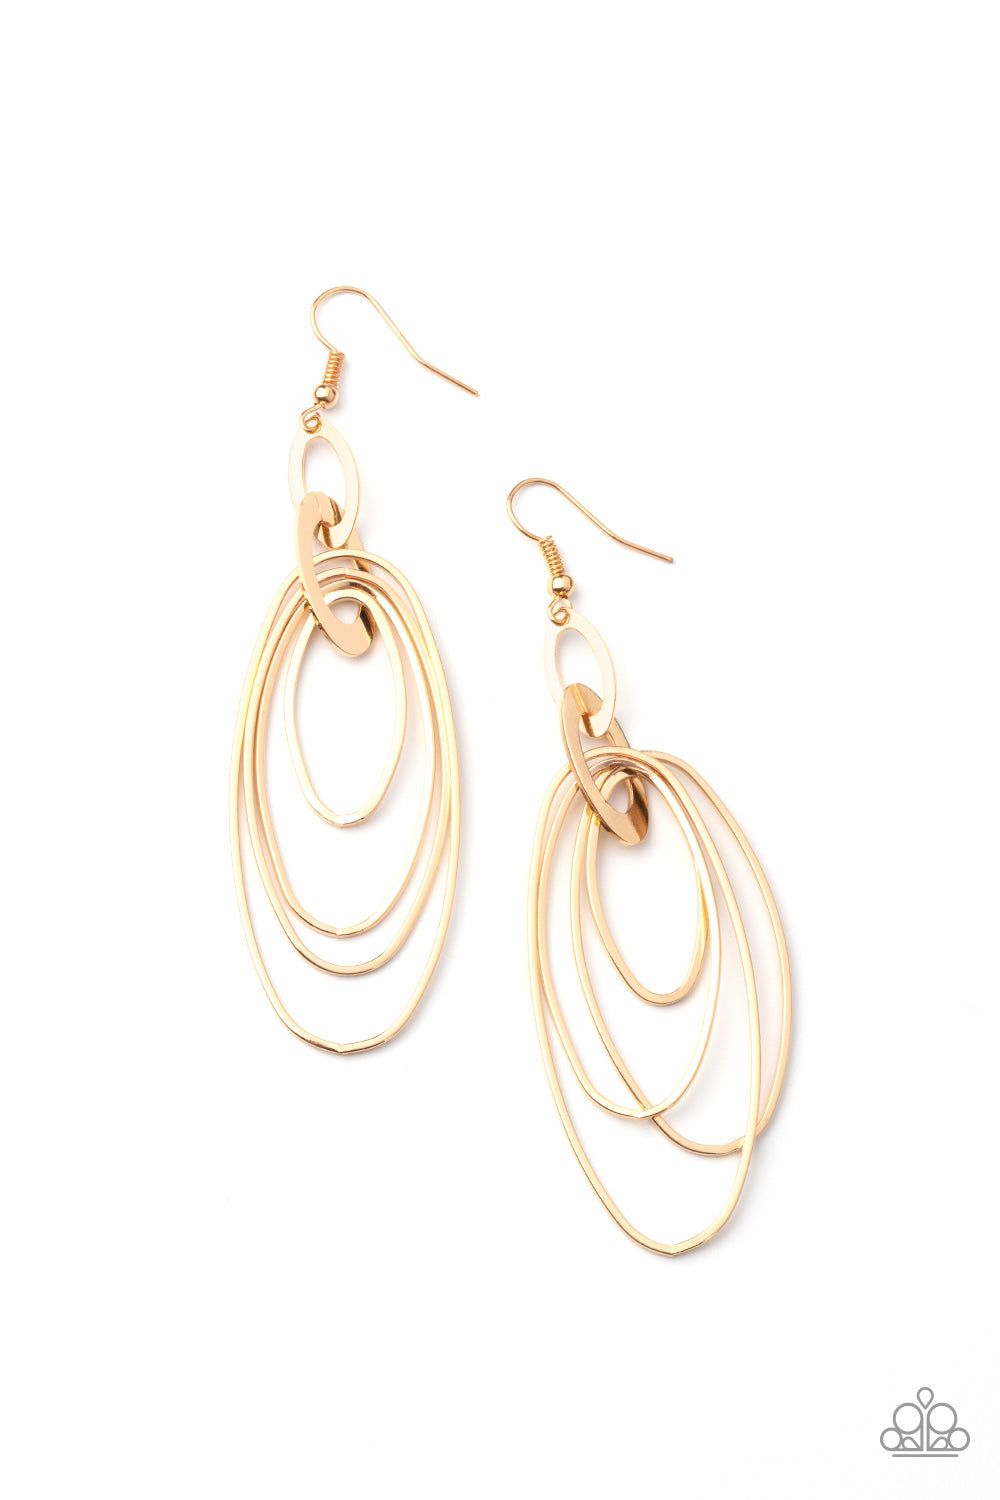 OVAL The Moon - Gold Earrings - Princess Glam Shop